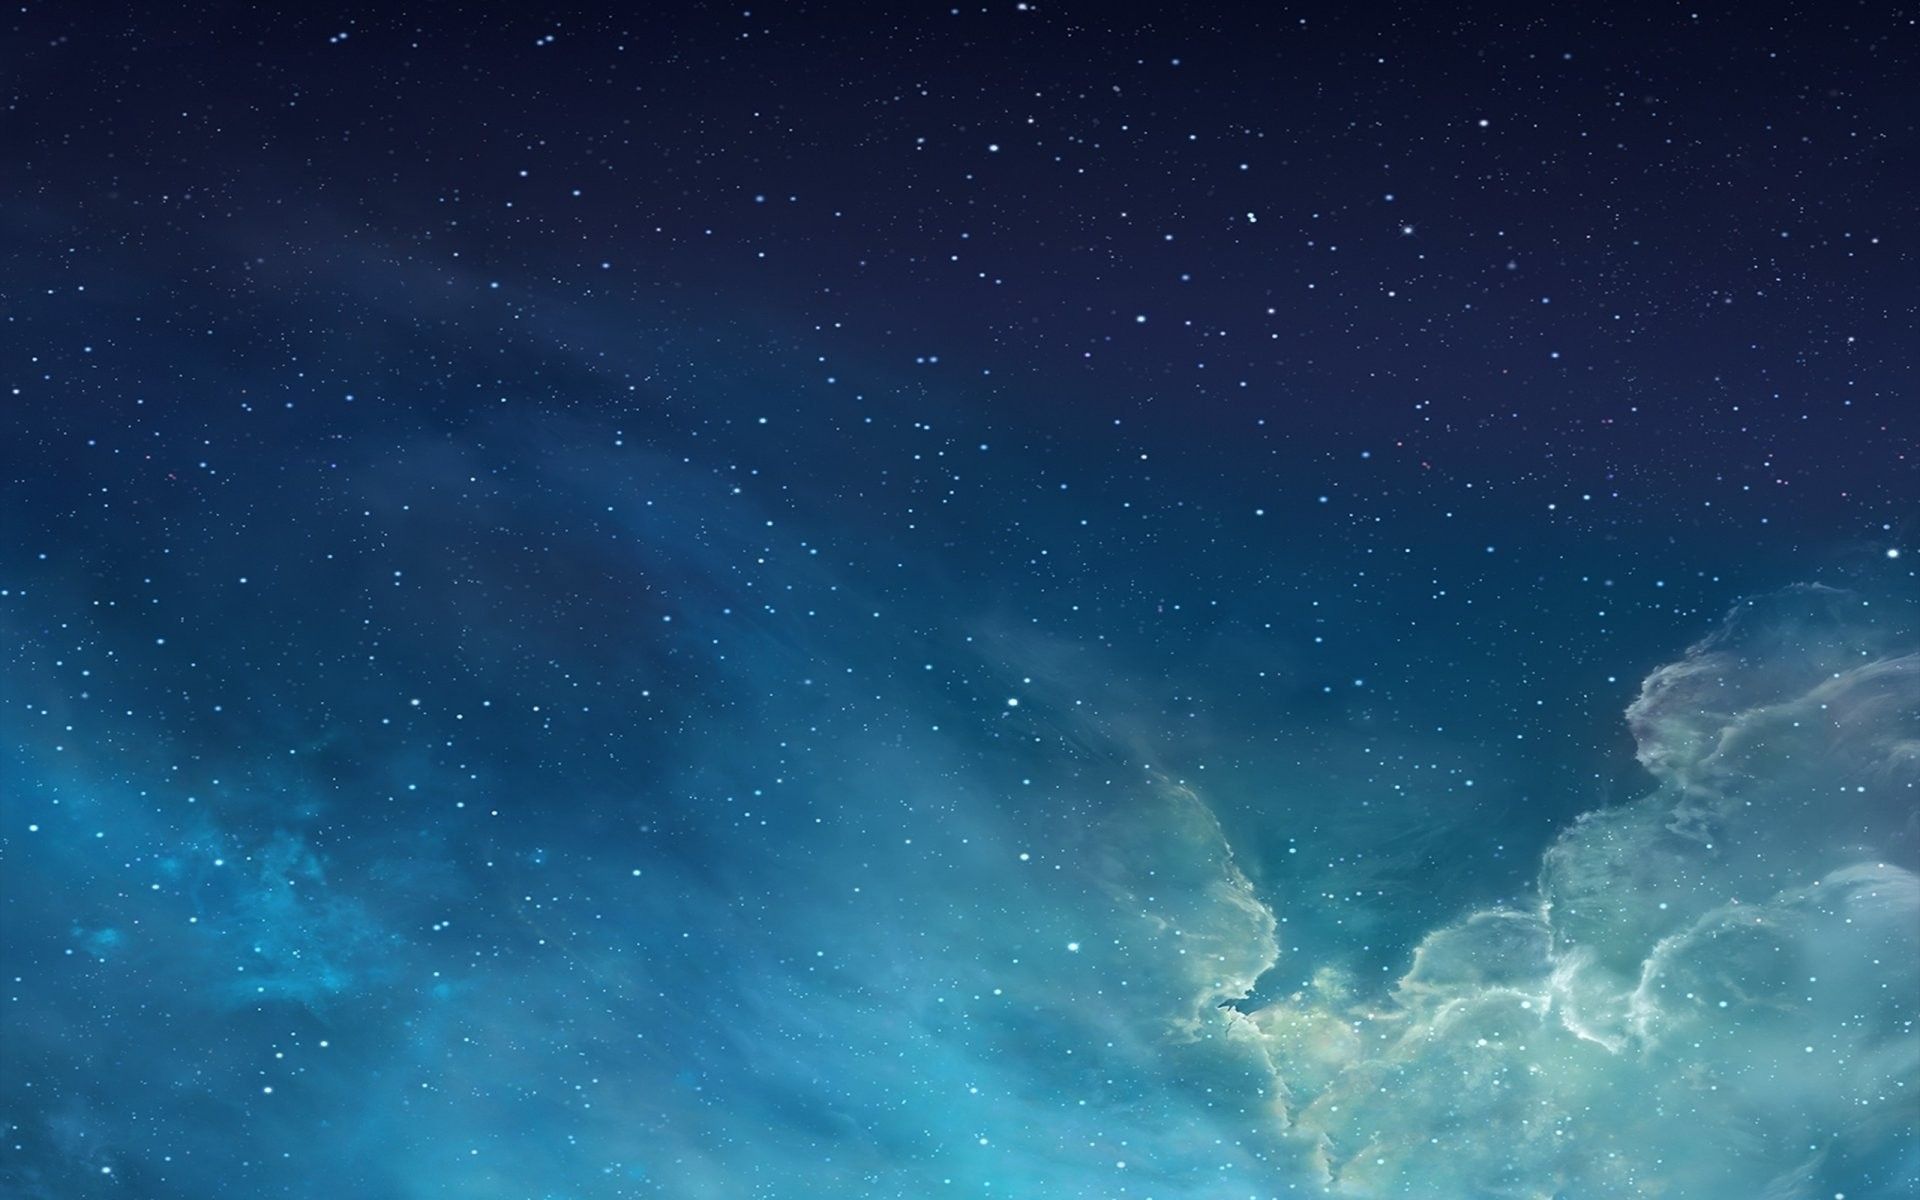 A blue and white background with stars - MacBook, 1920x1200